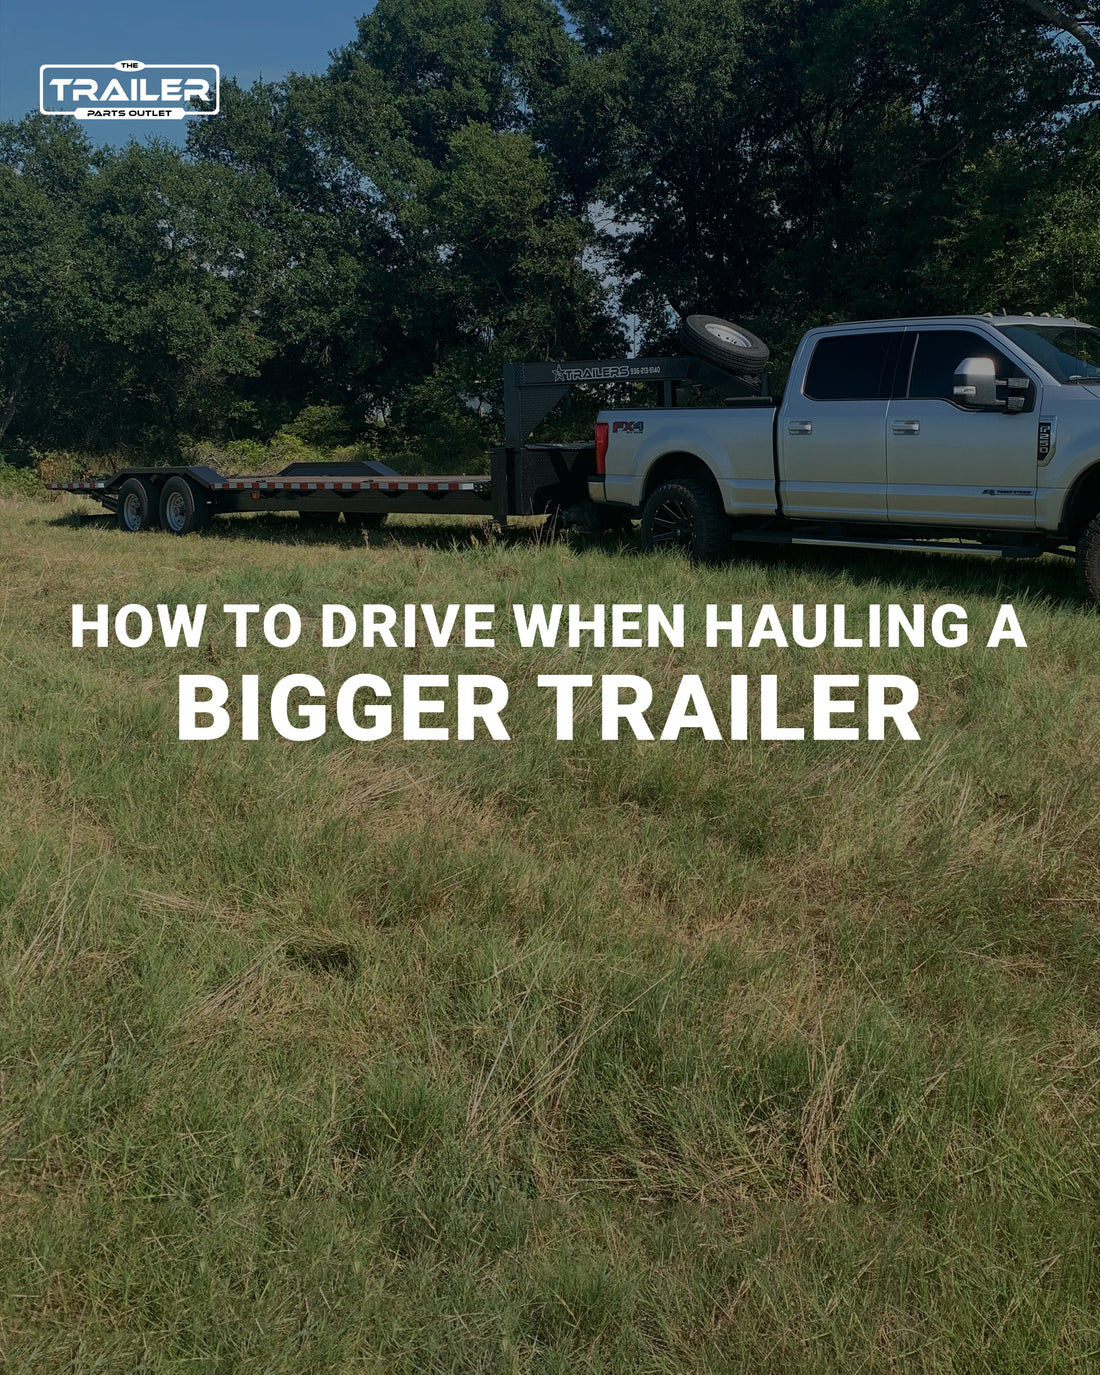 How to Drive When Hauling a Bigger Trailer